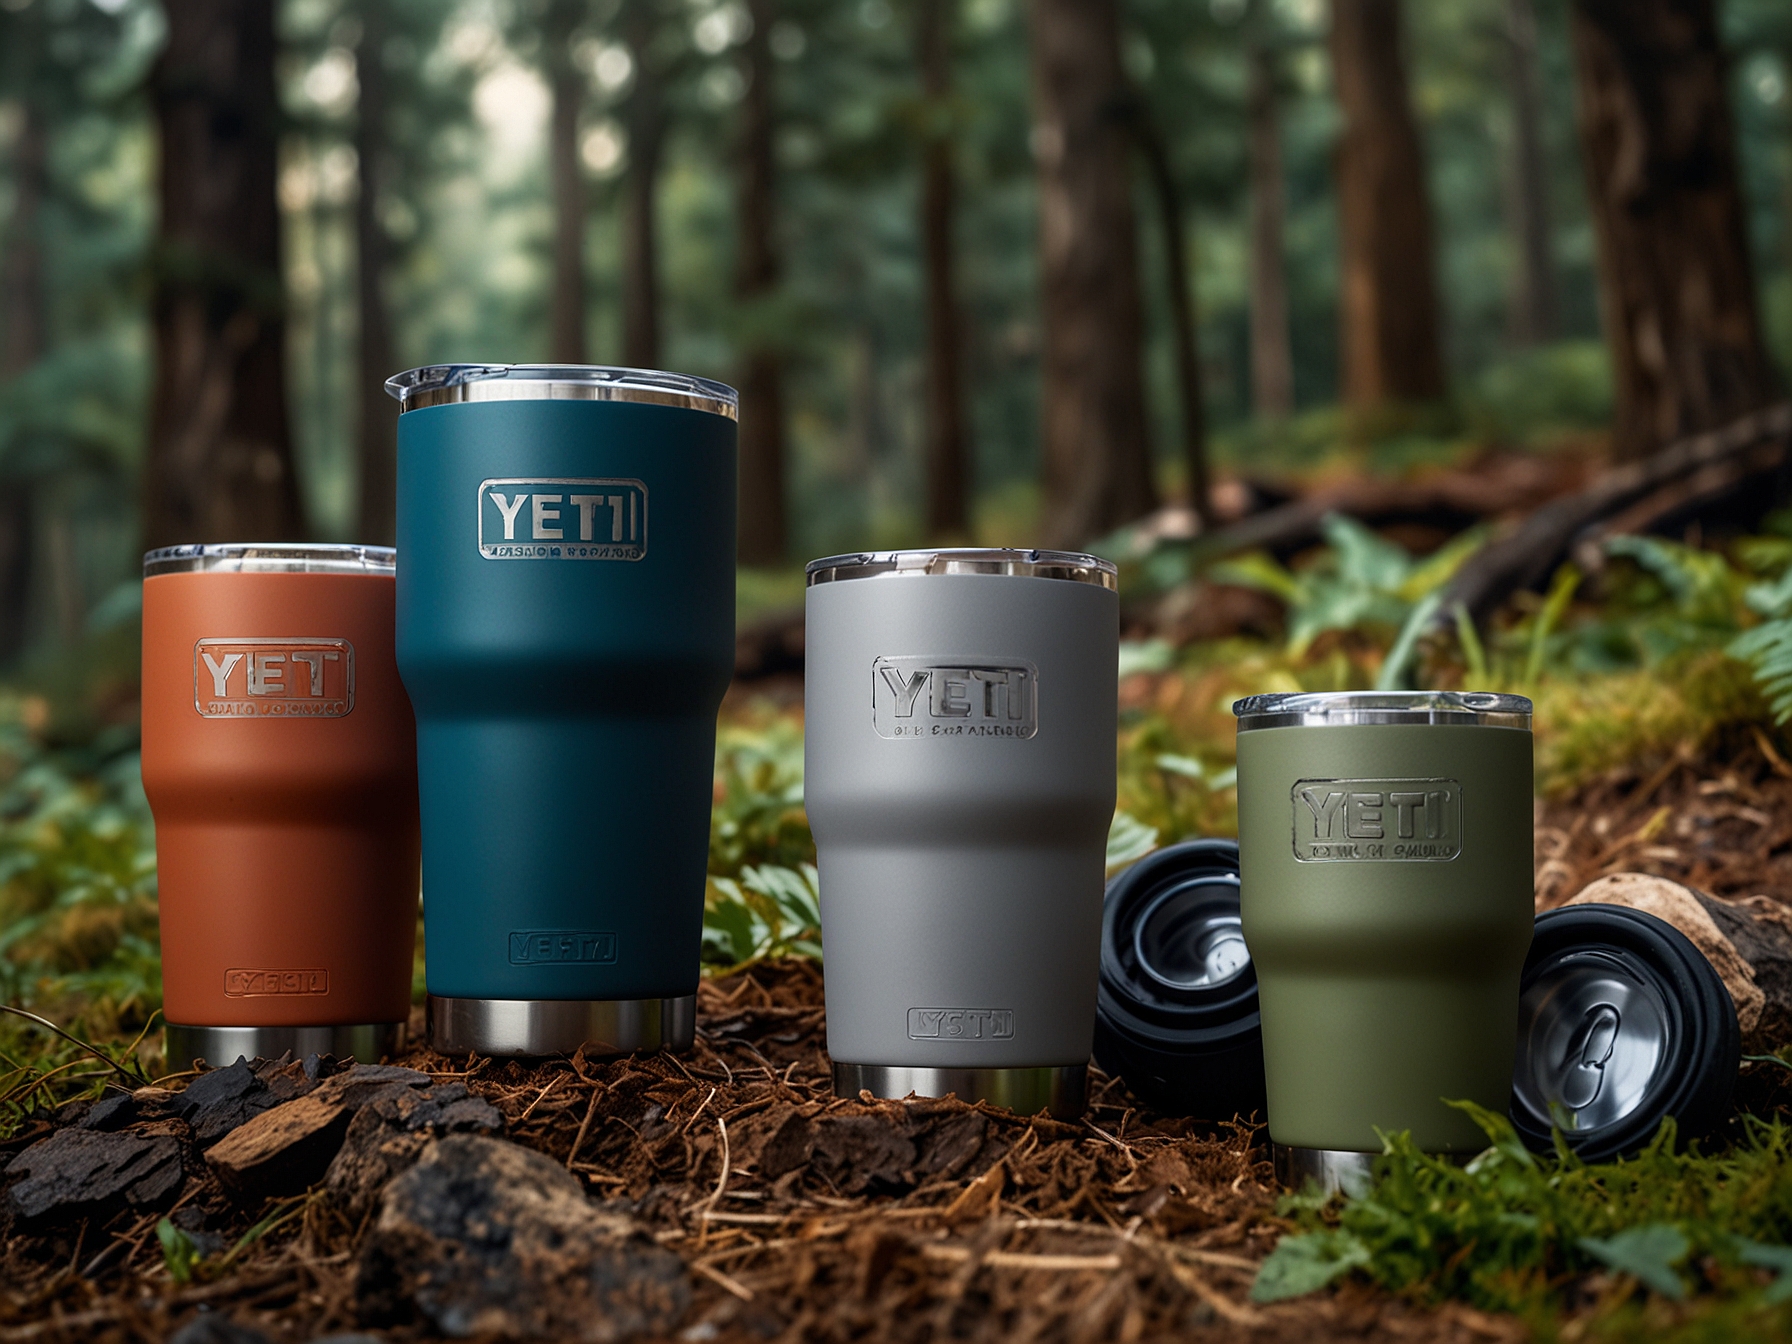 A new line of YETI's high-performance drinkware, highlighting the brand's commitment to innovation and quality. The drinkware is showcased in a natural outdoor setting, emphasizing durability.